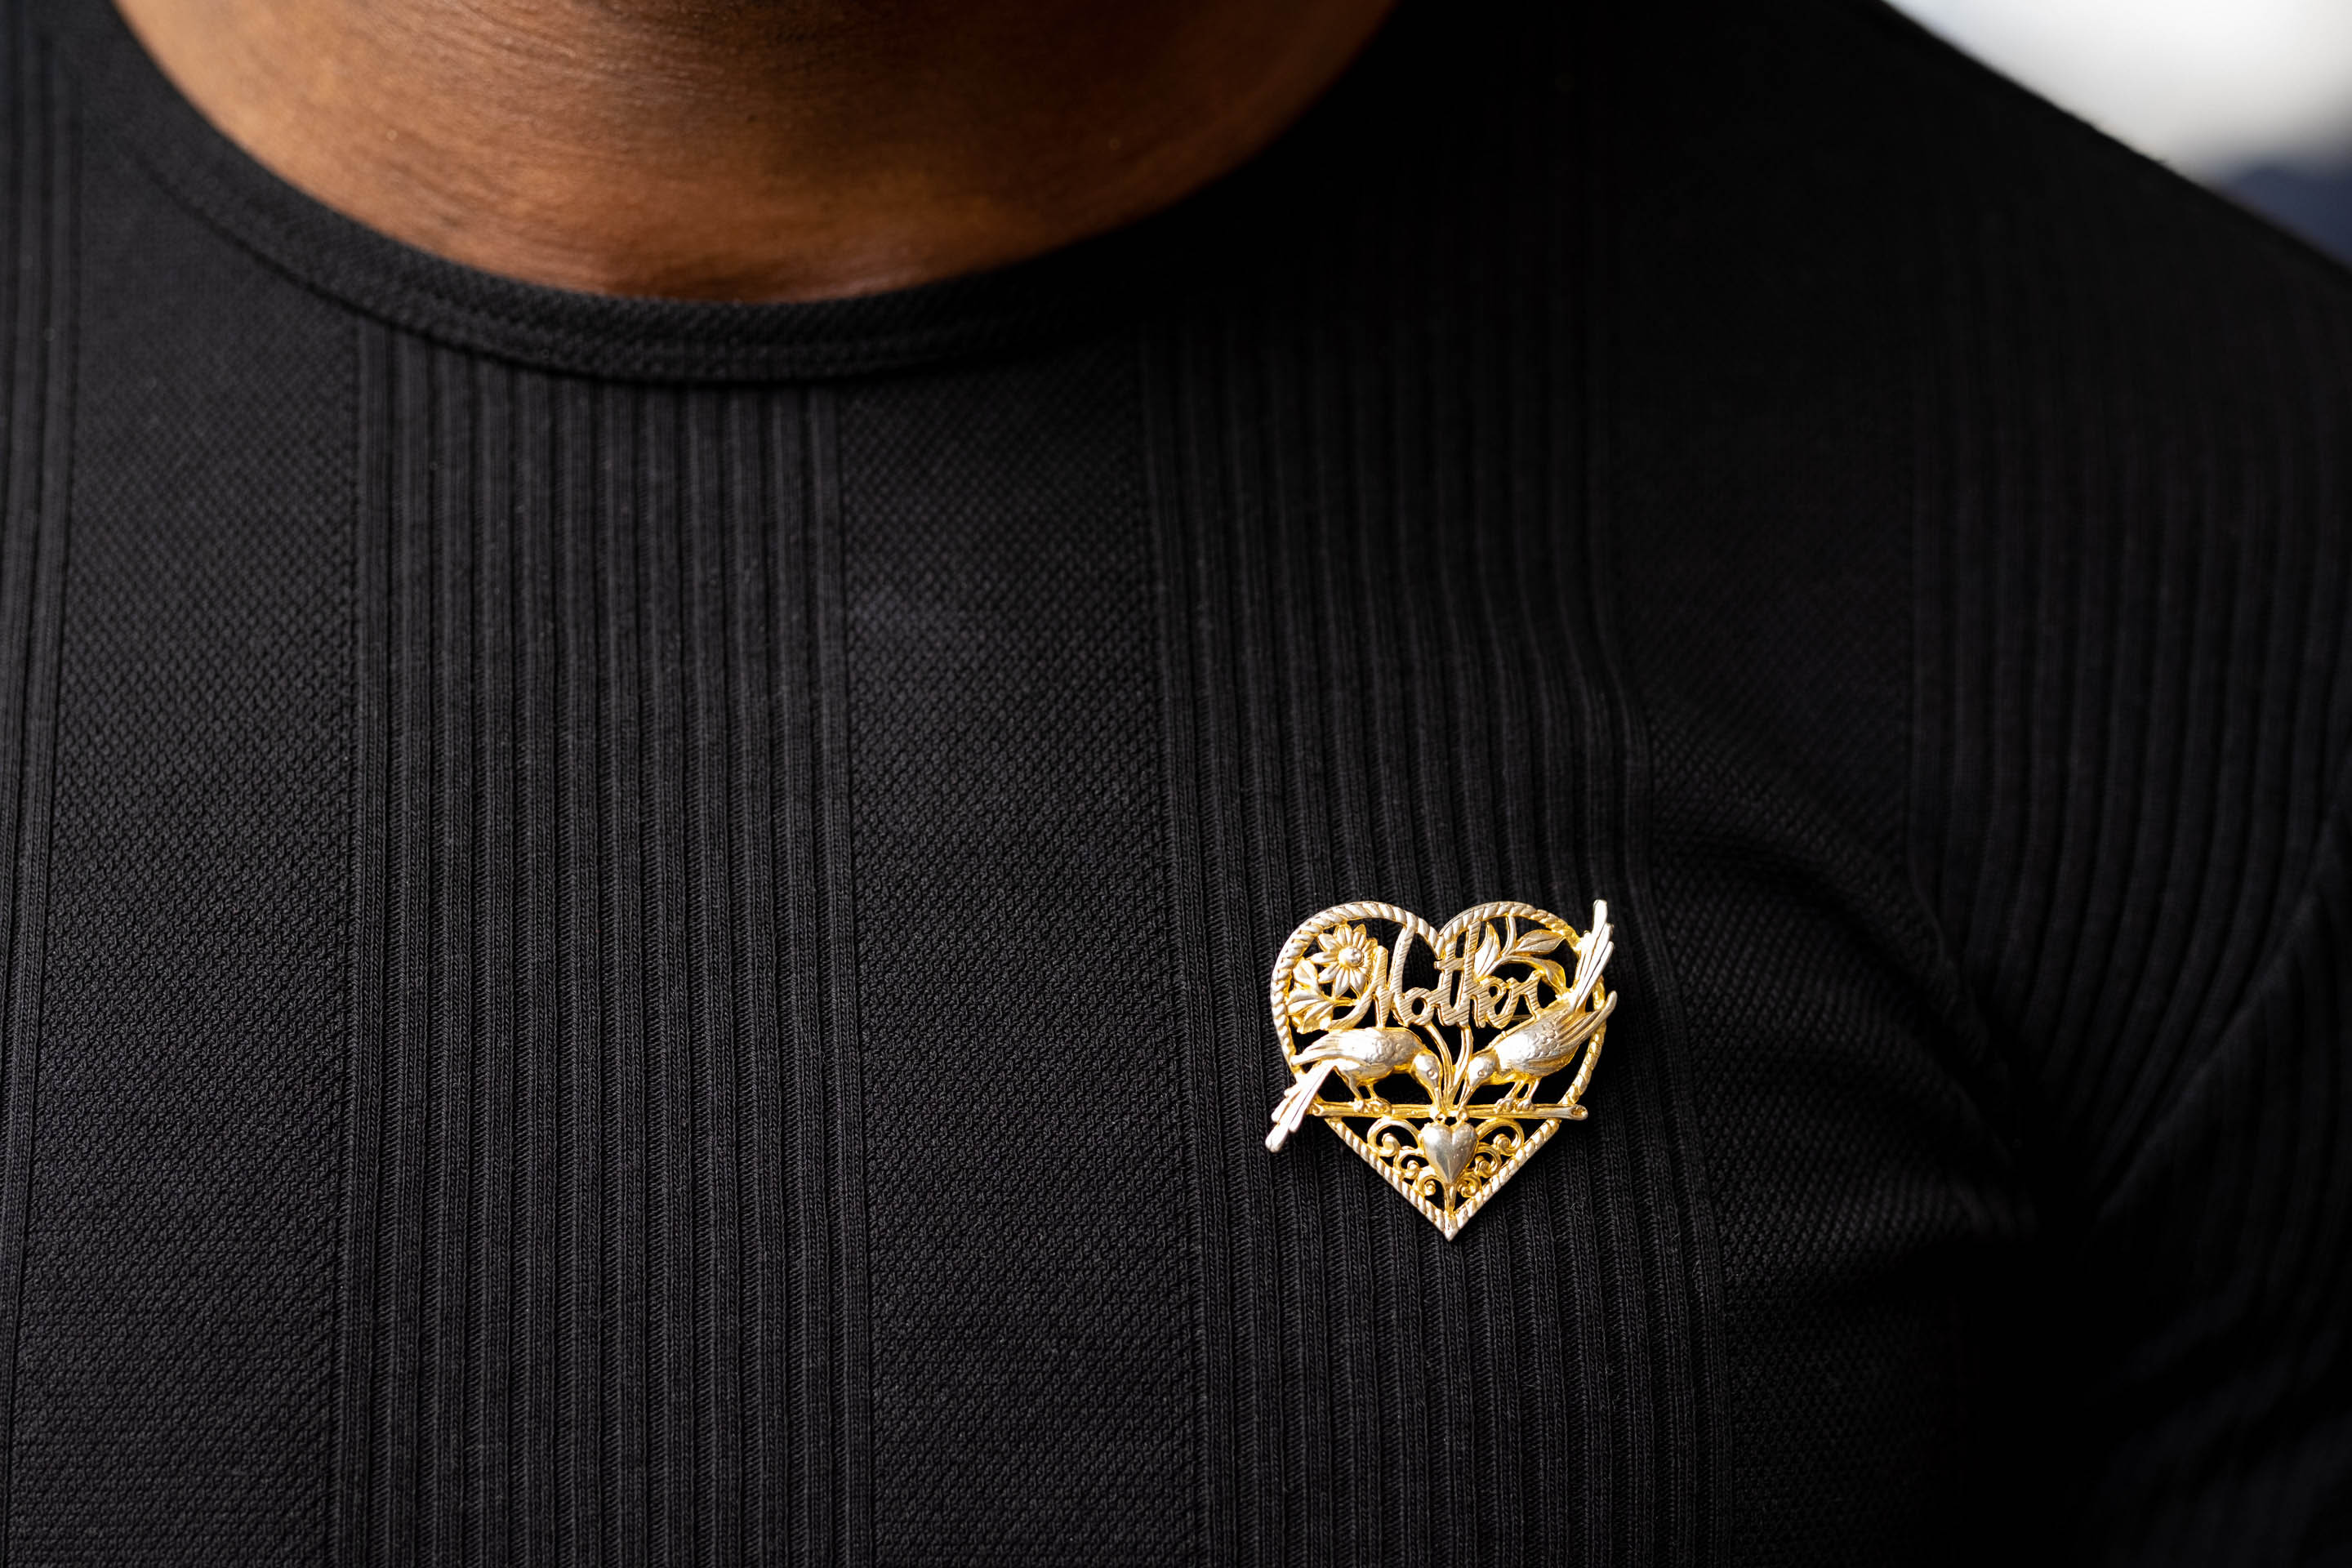 Kofi wearing his Nan's brooch. It's gold, heart shaped, features two birds and the word "Mother". It's pinned above his heart.